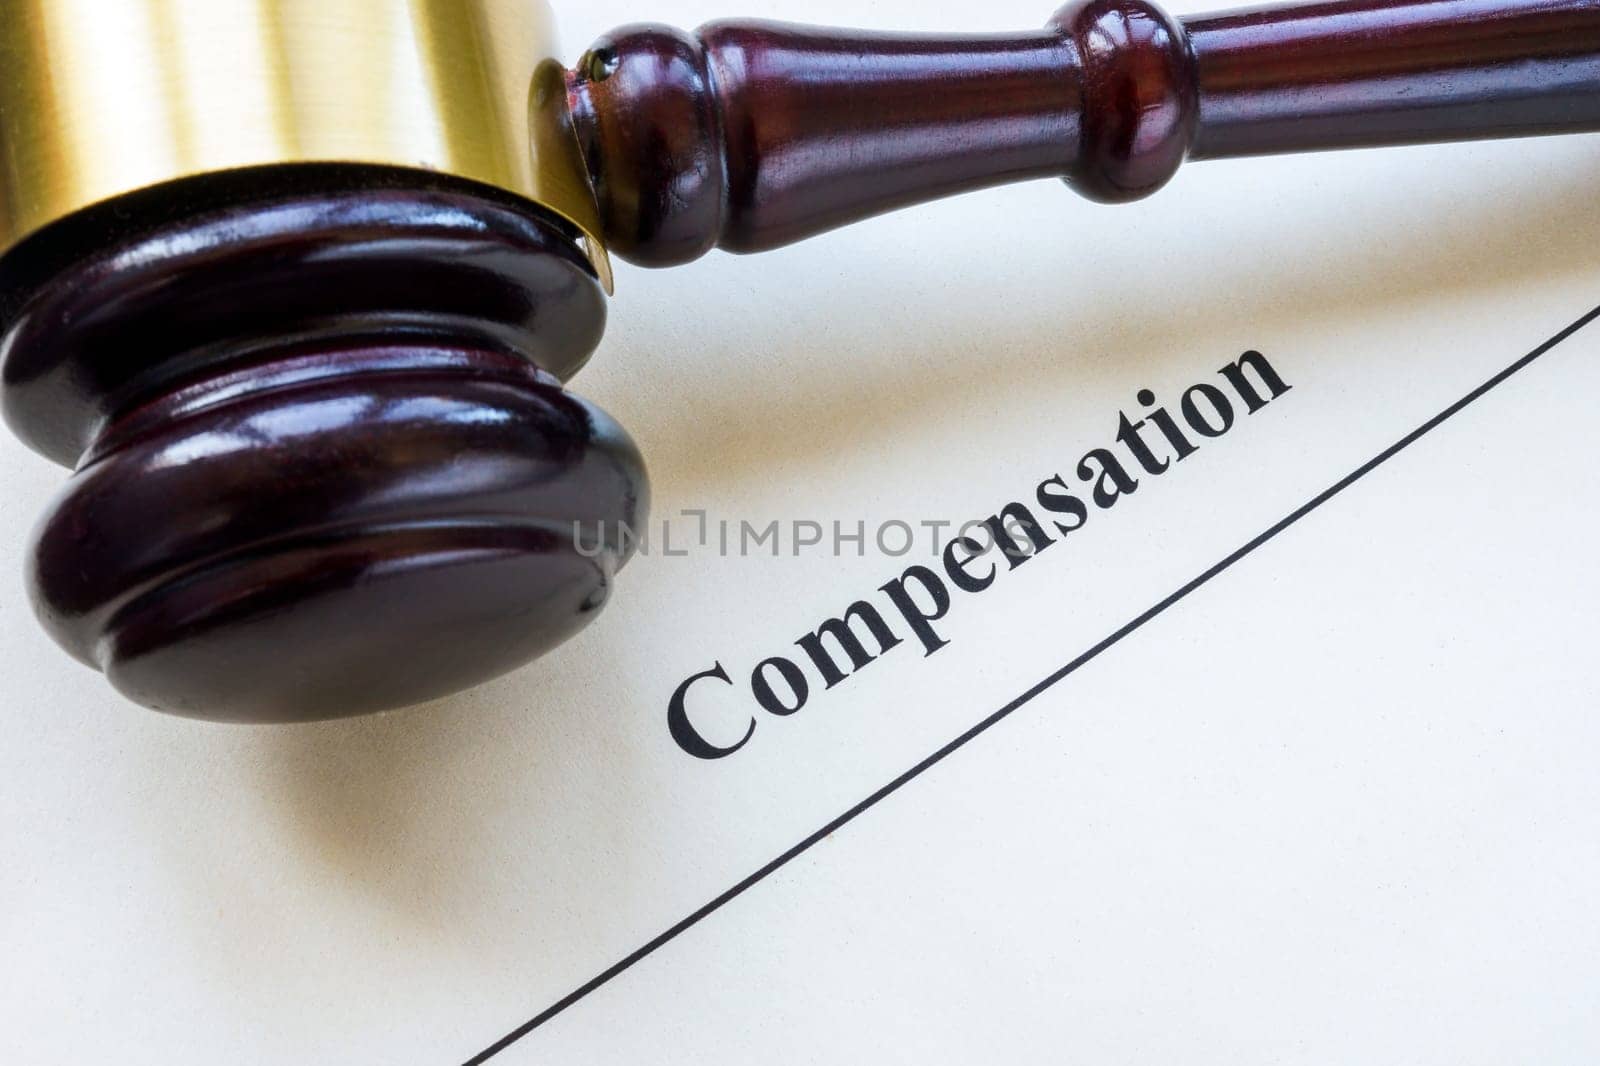 Document about compensation and gavel. by designer491